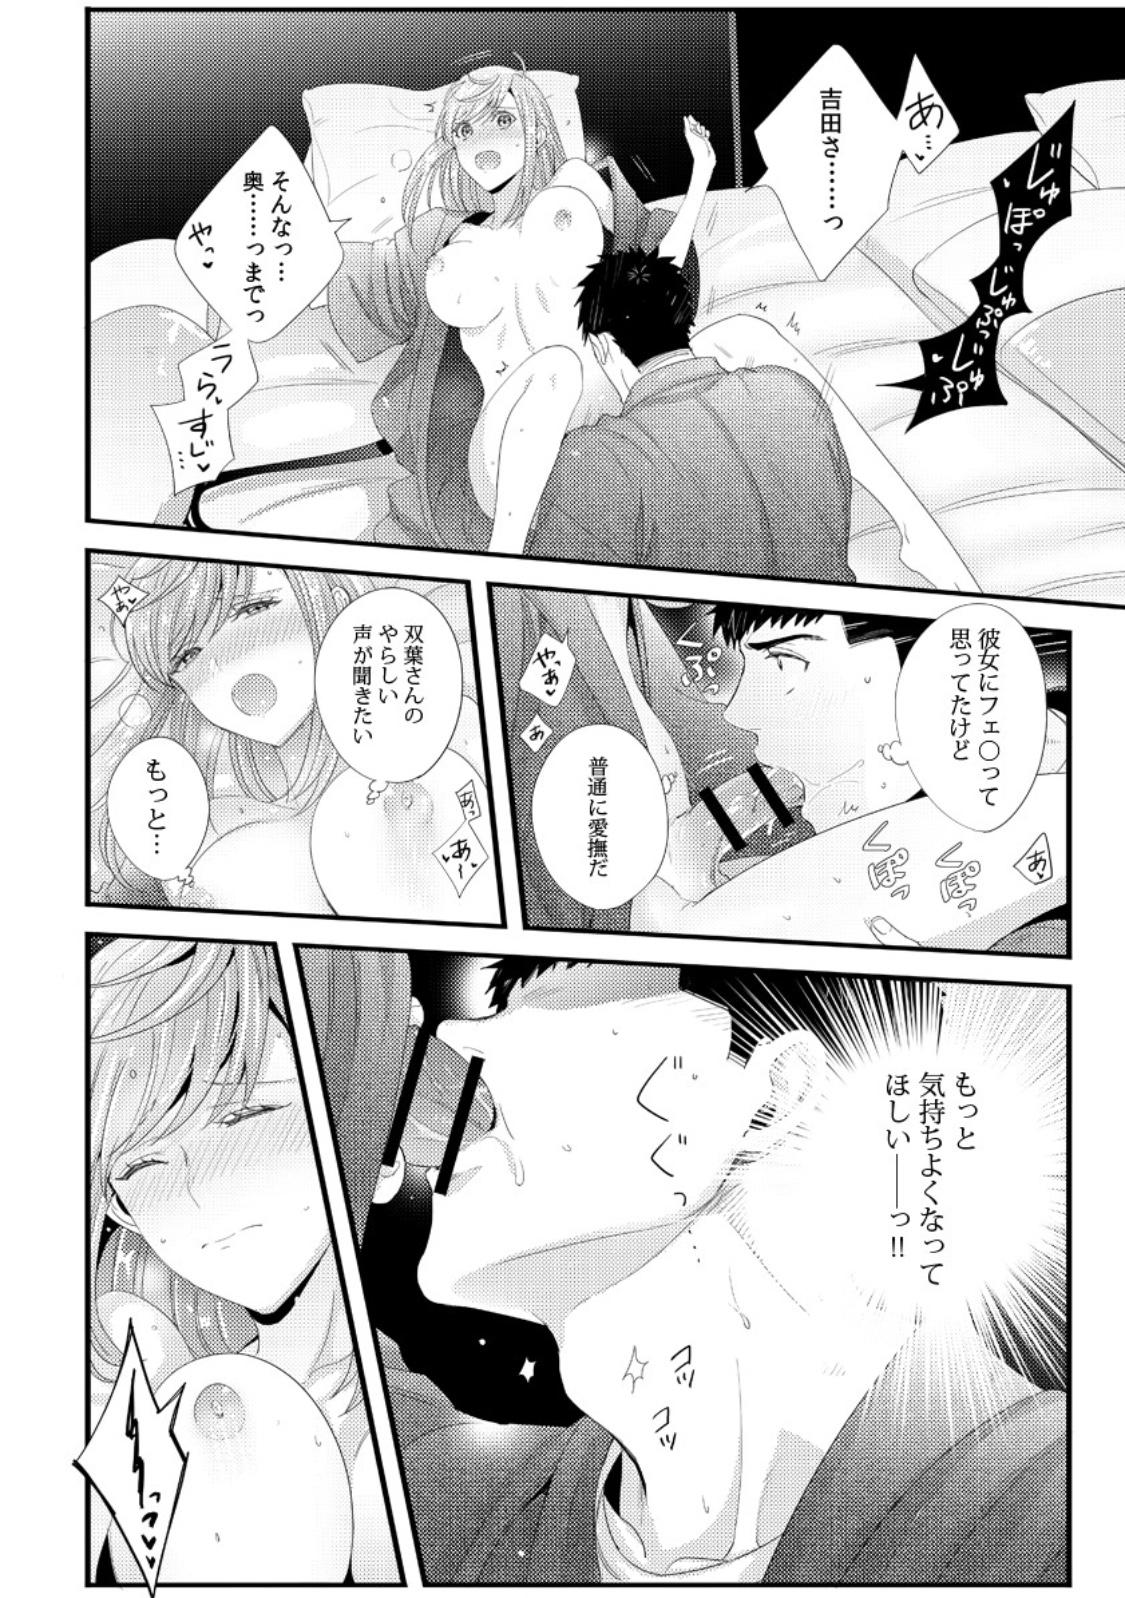 Please Let Me Hold You Futaba-San! Ch. 1-4 21